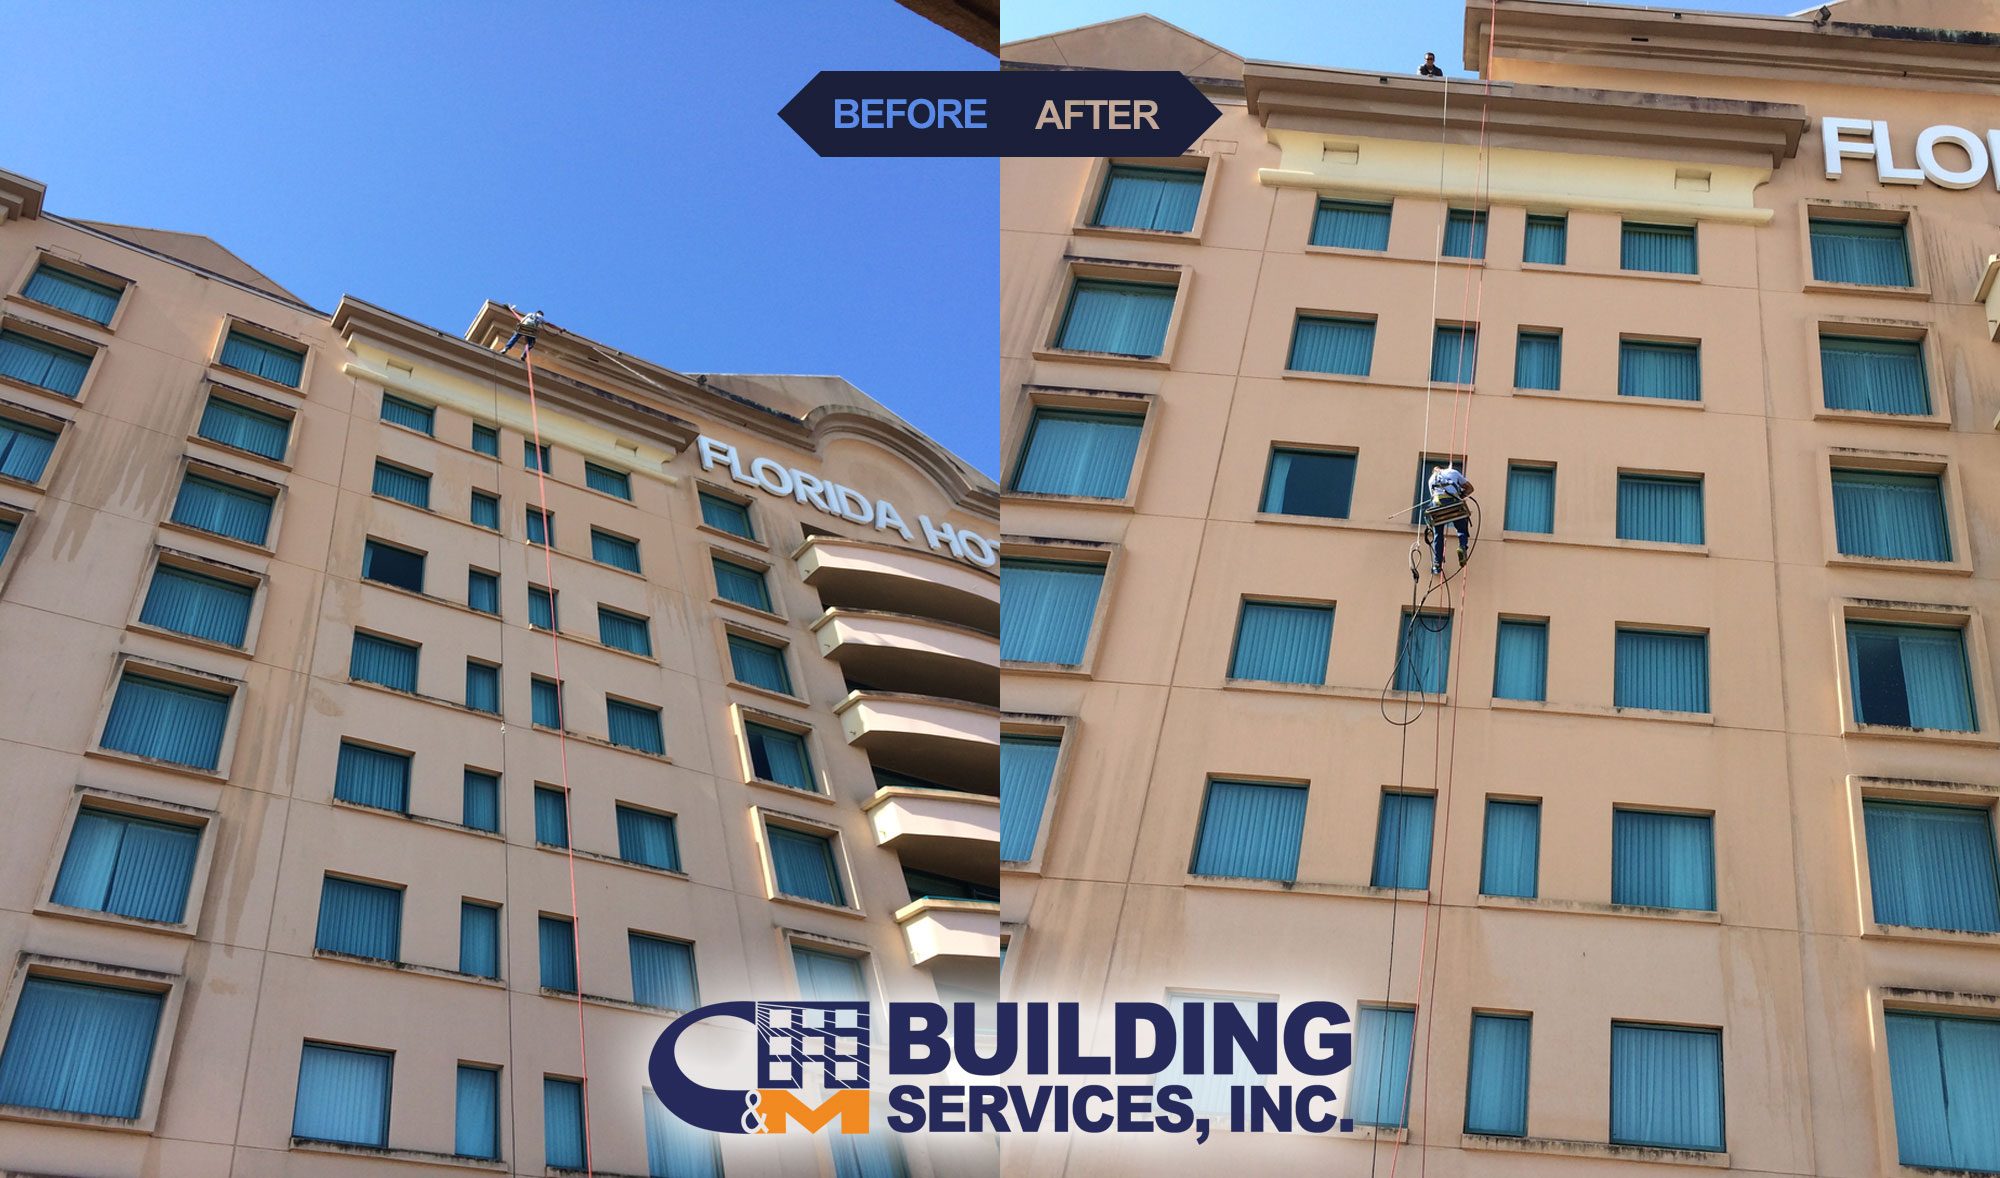 Commercial Cleaning Services, Orlando Window Cleaning Services, Roof Cleaning, Commercial Pressure Washing, Orlando Construction Clean-up, Central Florida Building Maintenance